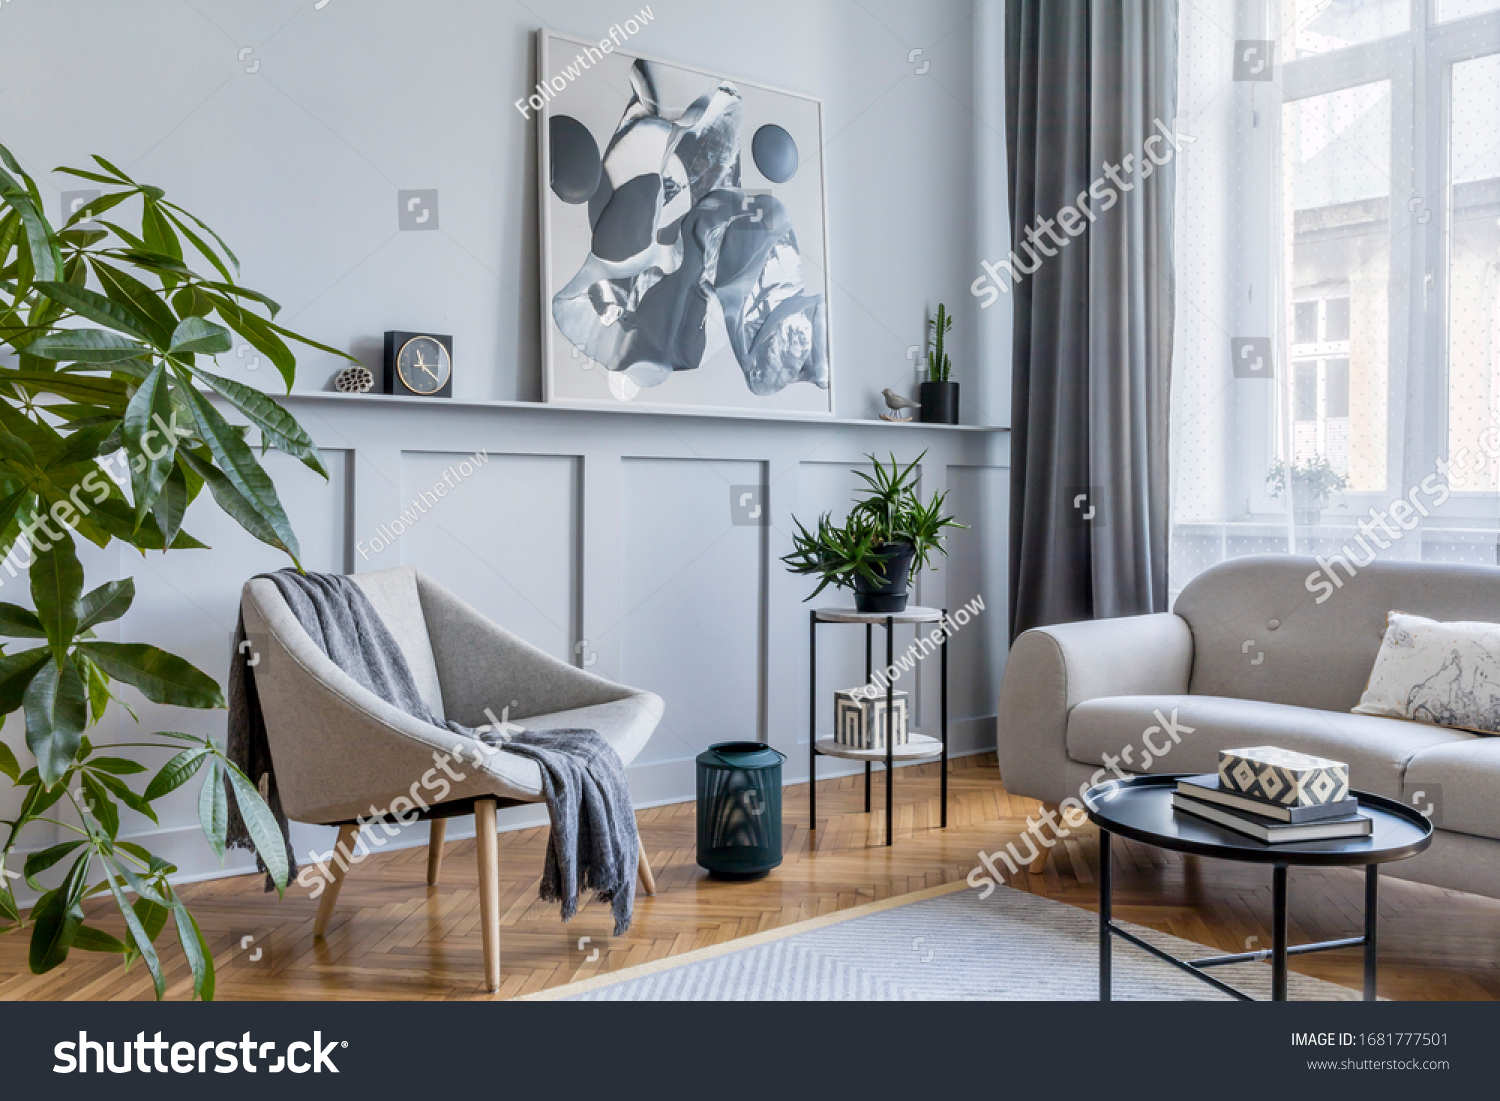 Stylish scandinavian home interior of living room with design gray sofa, armchair, marble stool, black coffee table, modern paintings, decoration, plant and elegant personal accessories in home decor. #1681777501